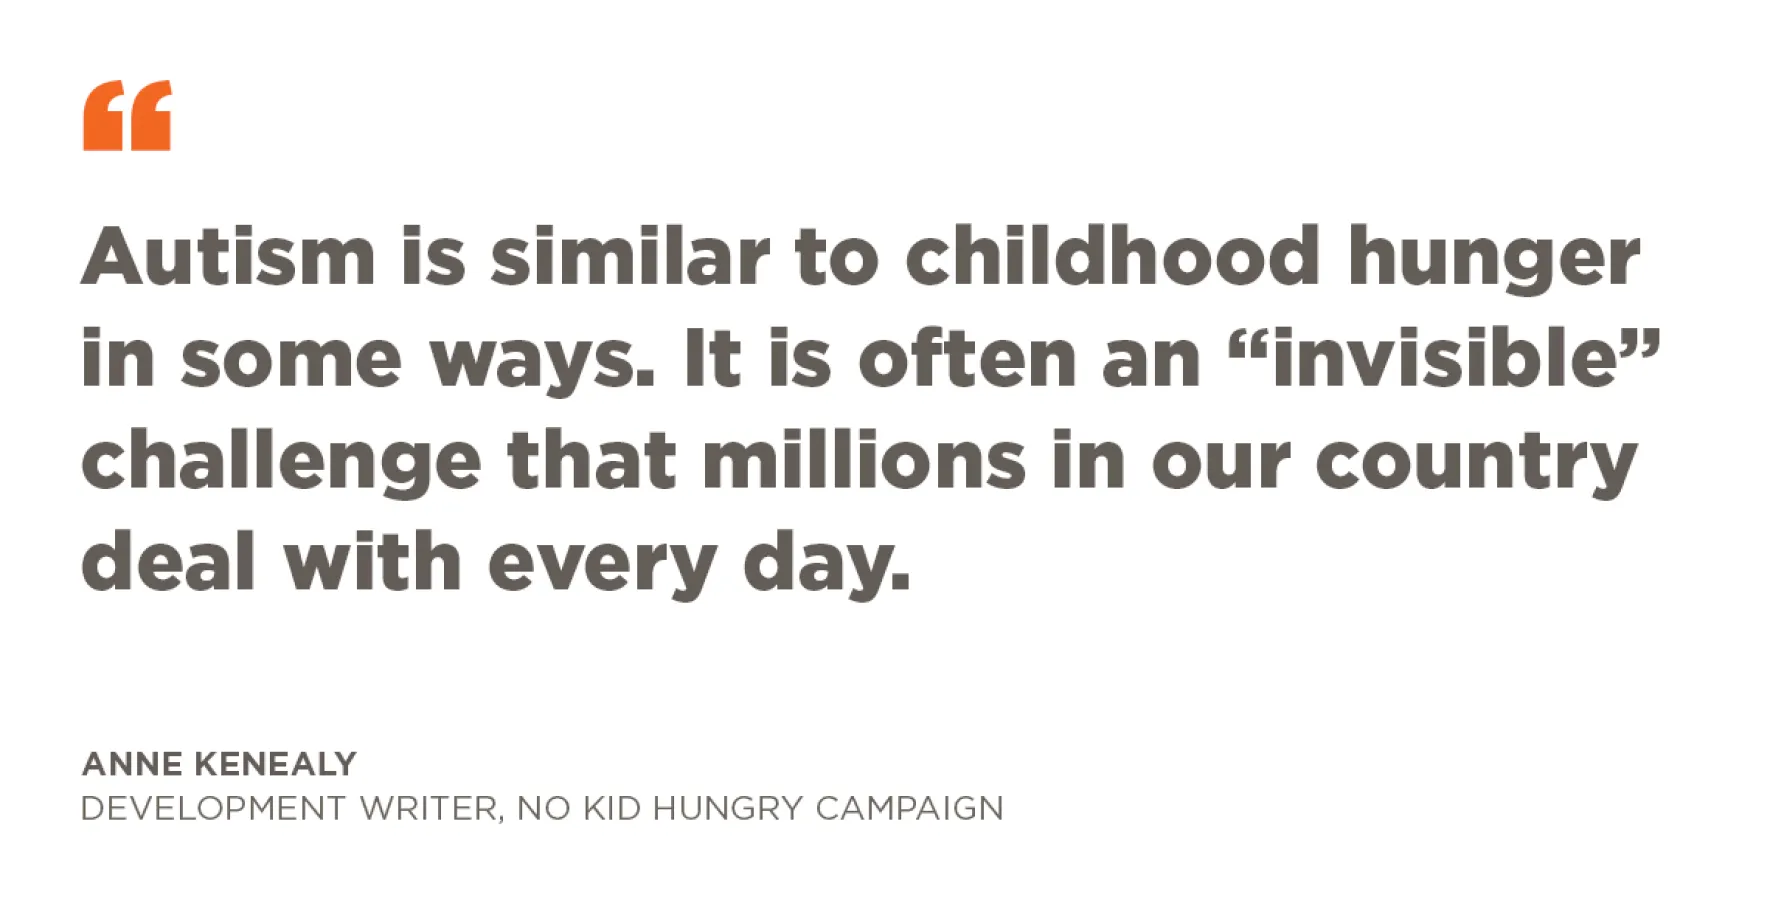 Quote graphic Autism is similar to childhood hunger in some ways. It is often an “invisible” challenge that millions in our country deal with every day."